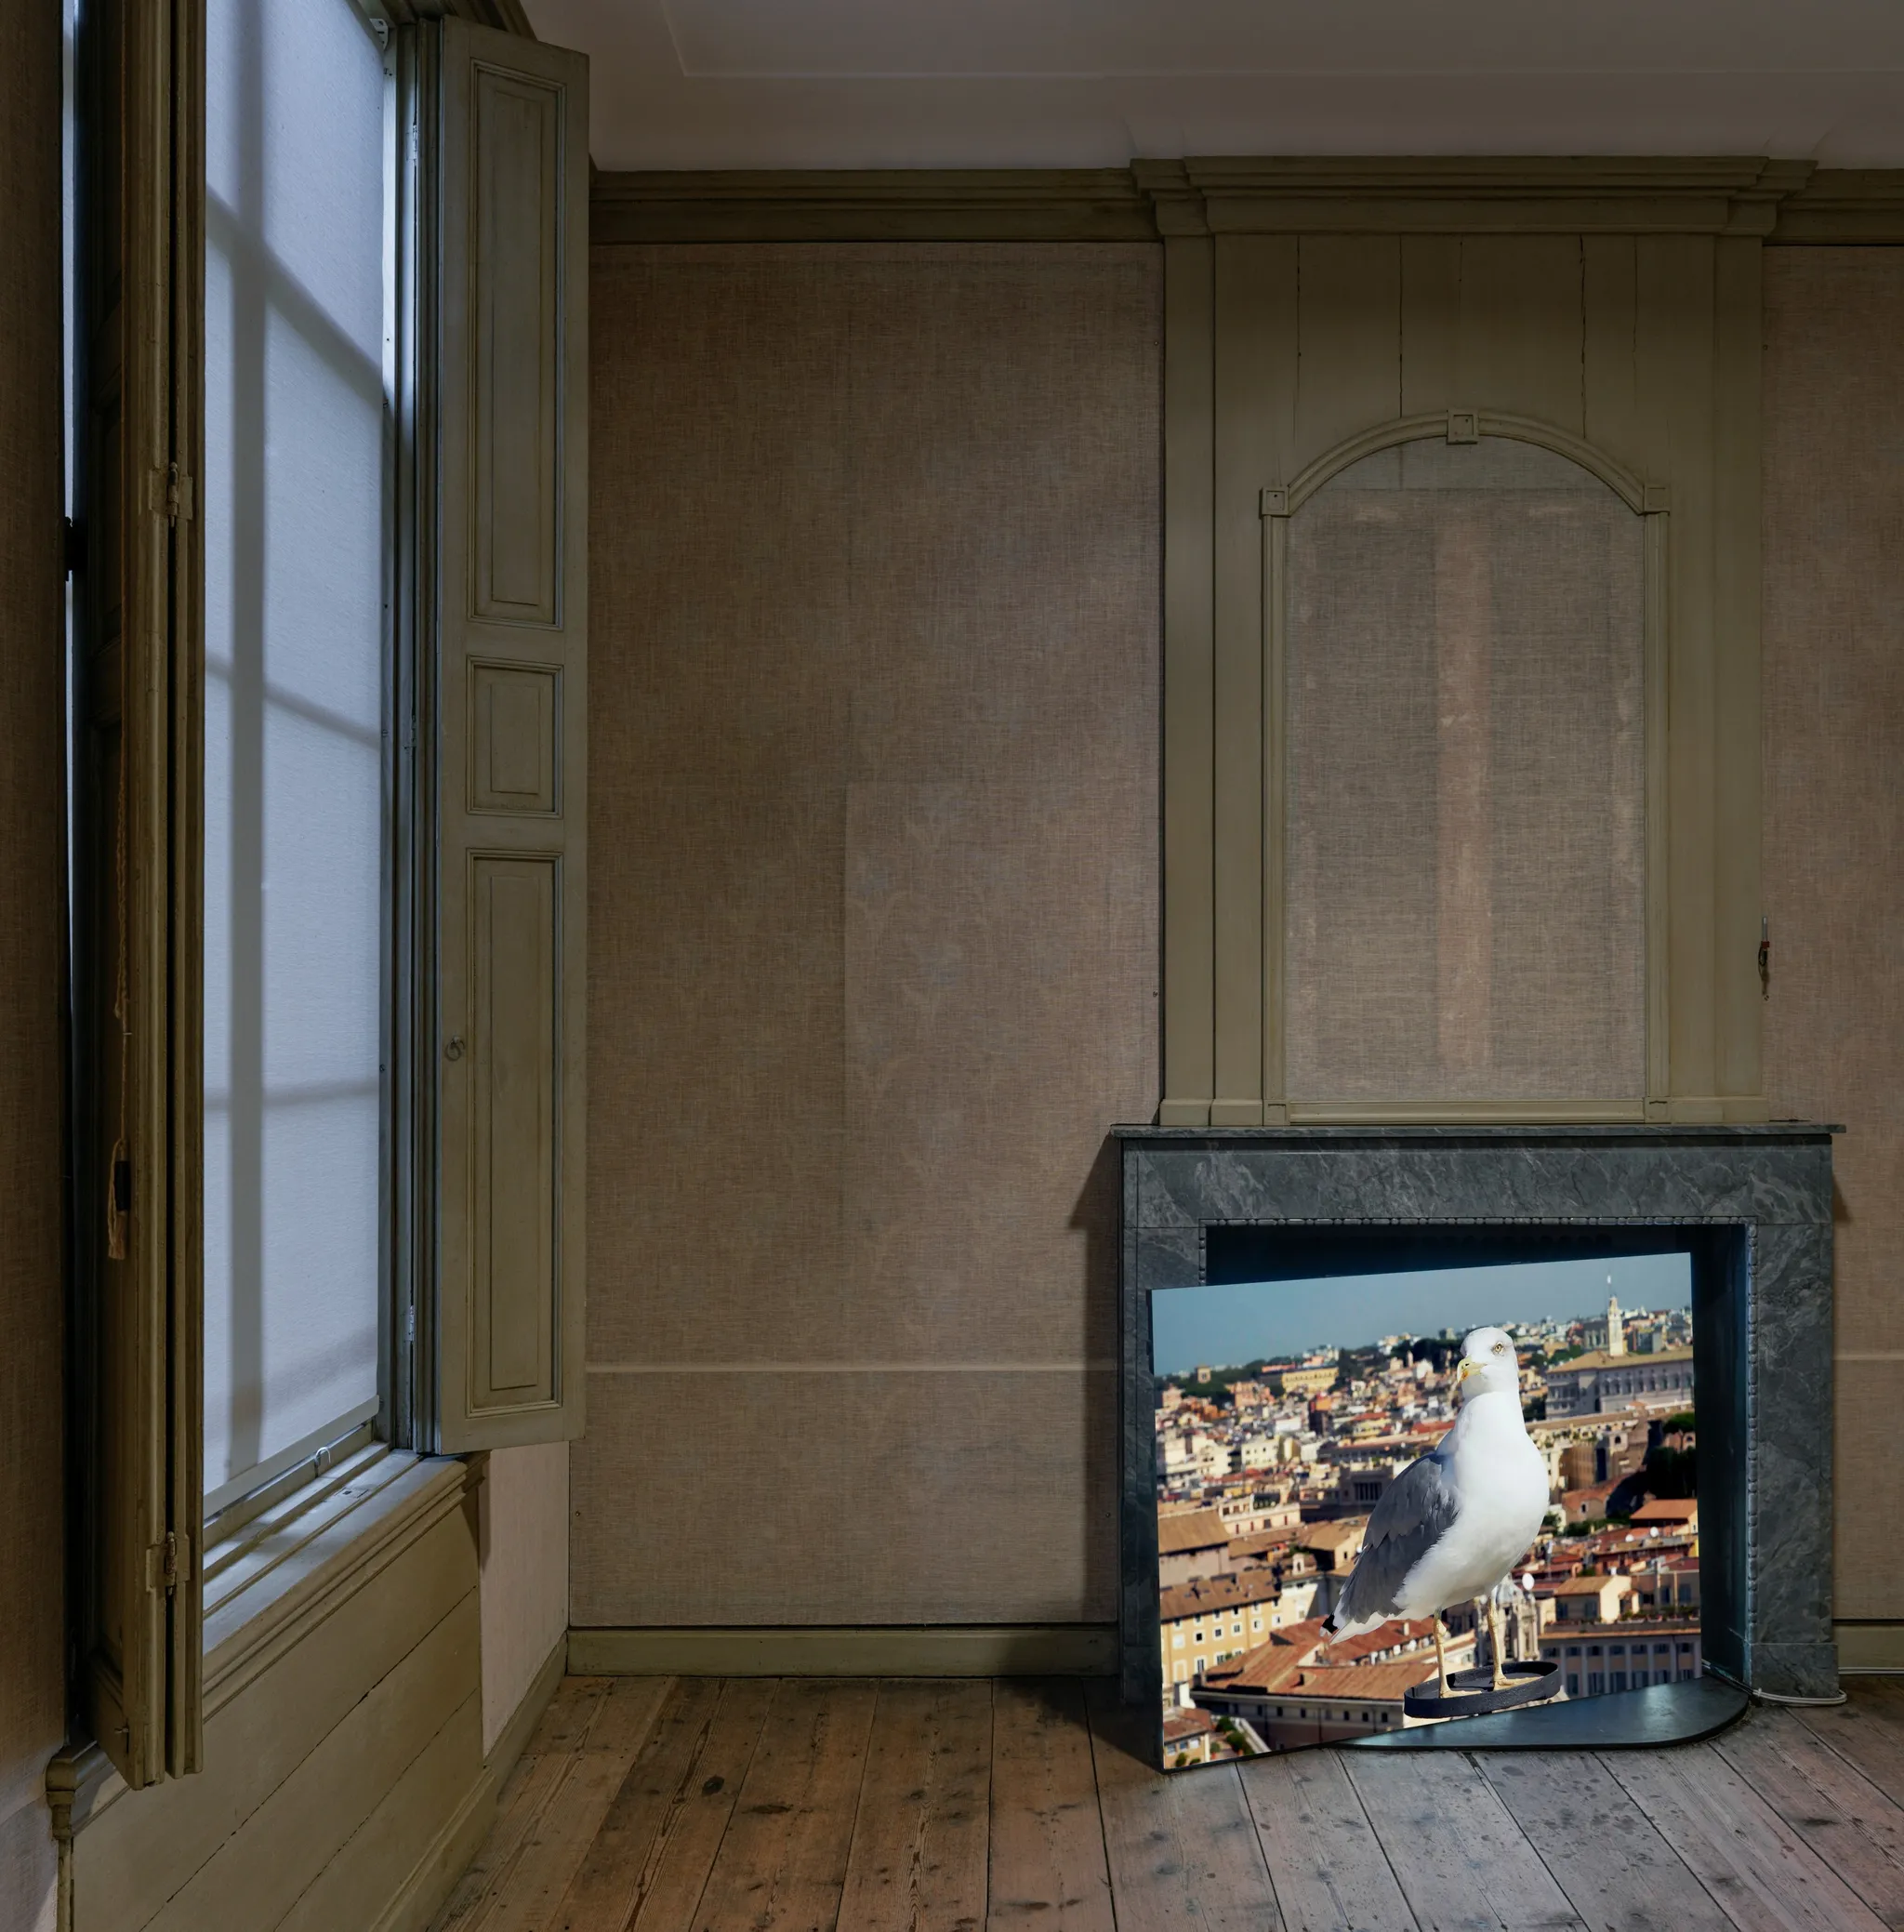 The image of a seagull perched on top of a building, on a screen placed diagonally in front of a marble chimney